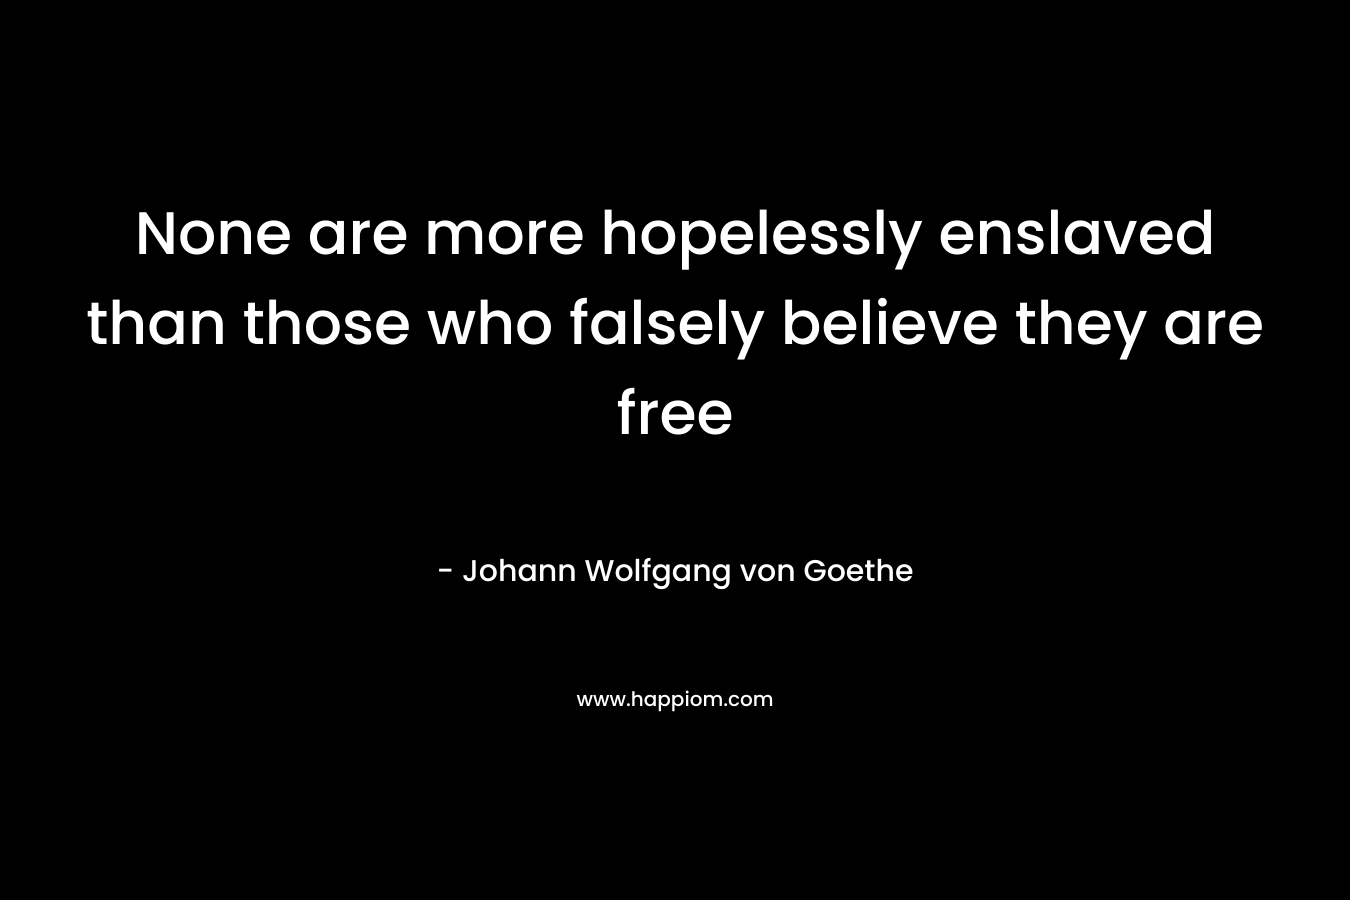 None are more hopelessly enslaved than those who falsely believe they are free